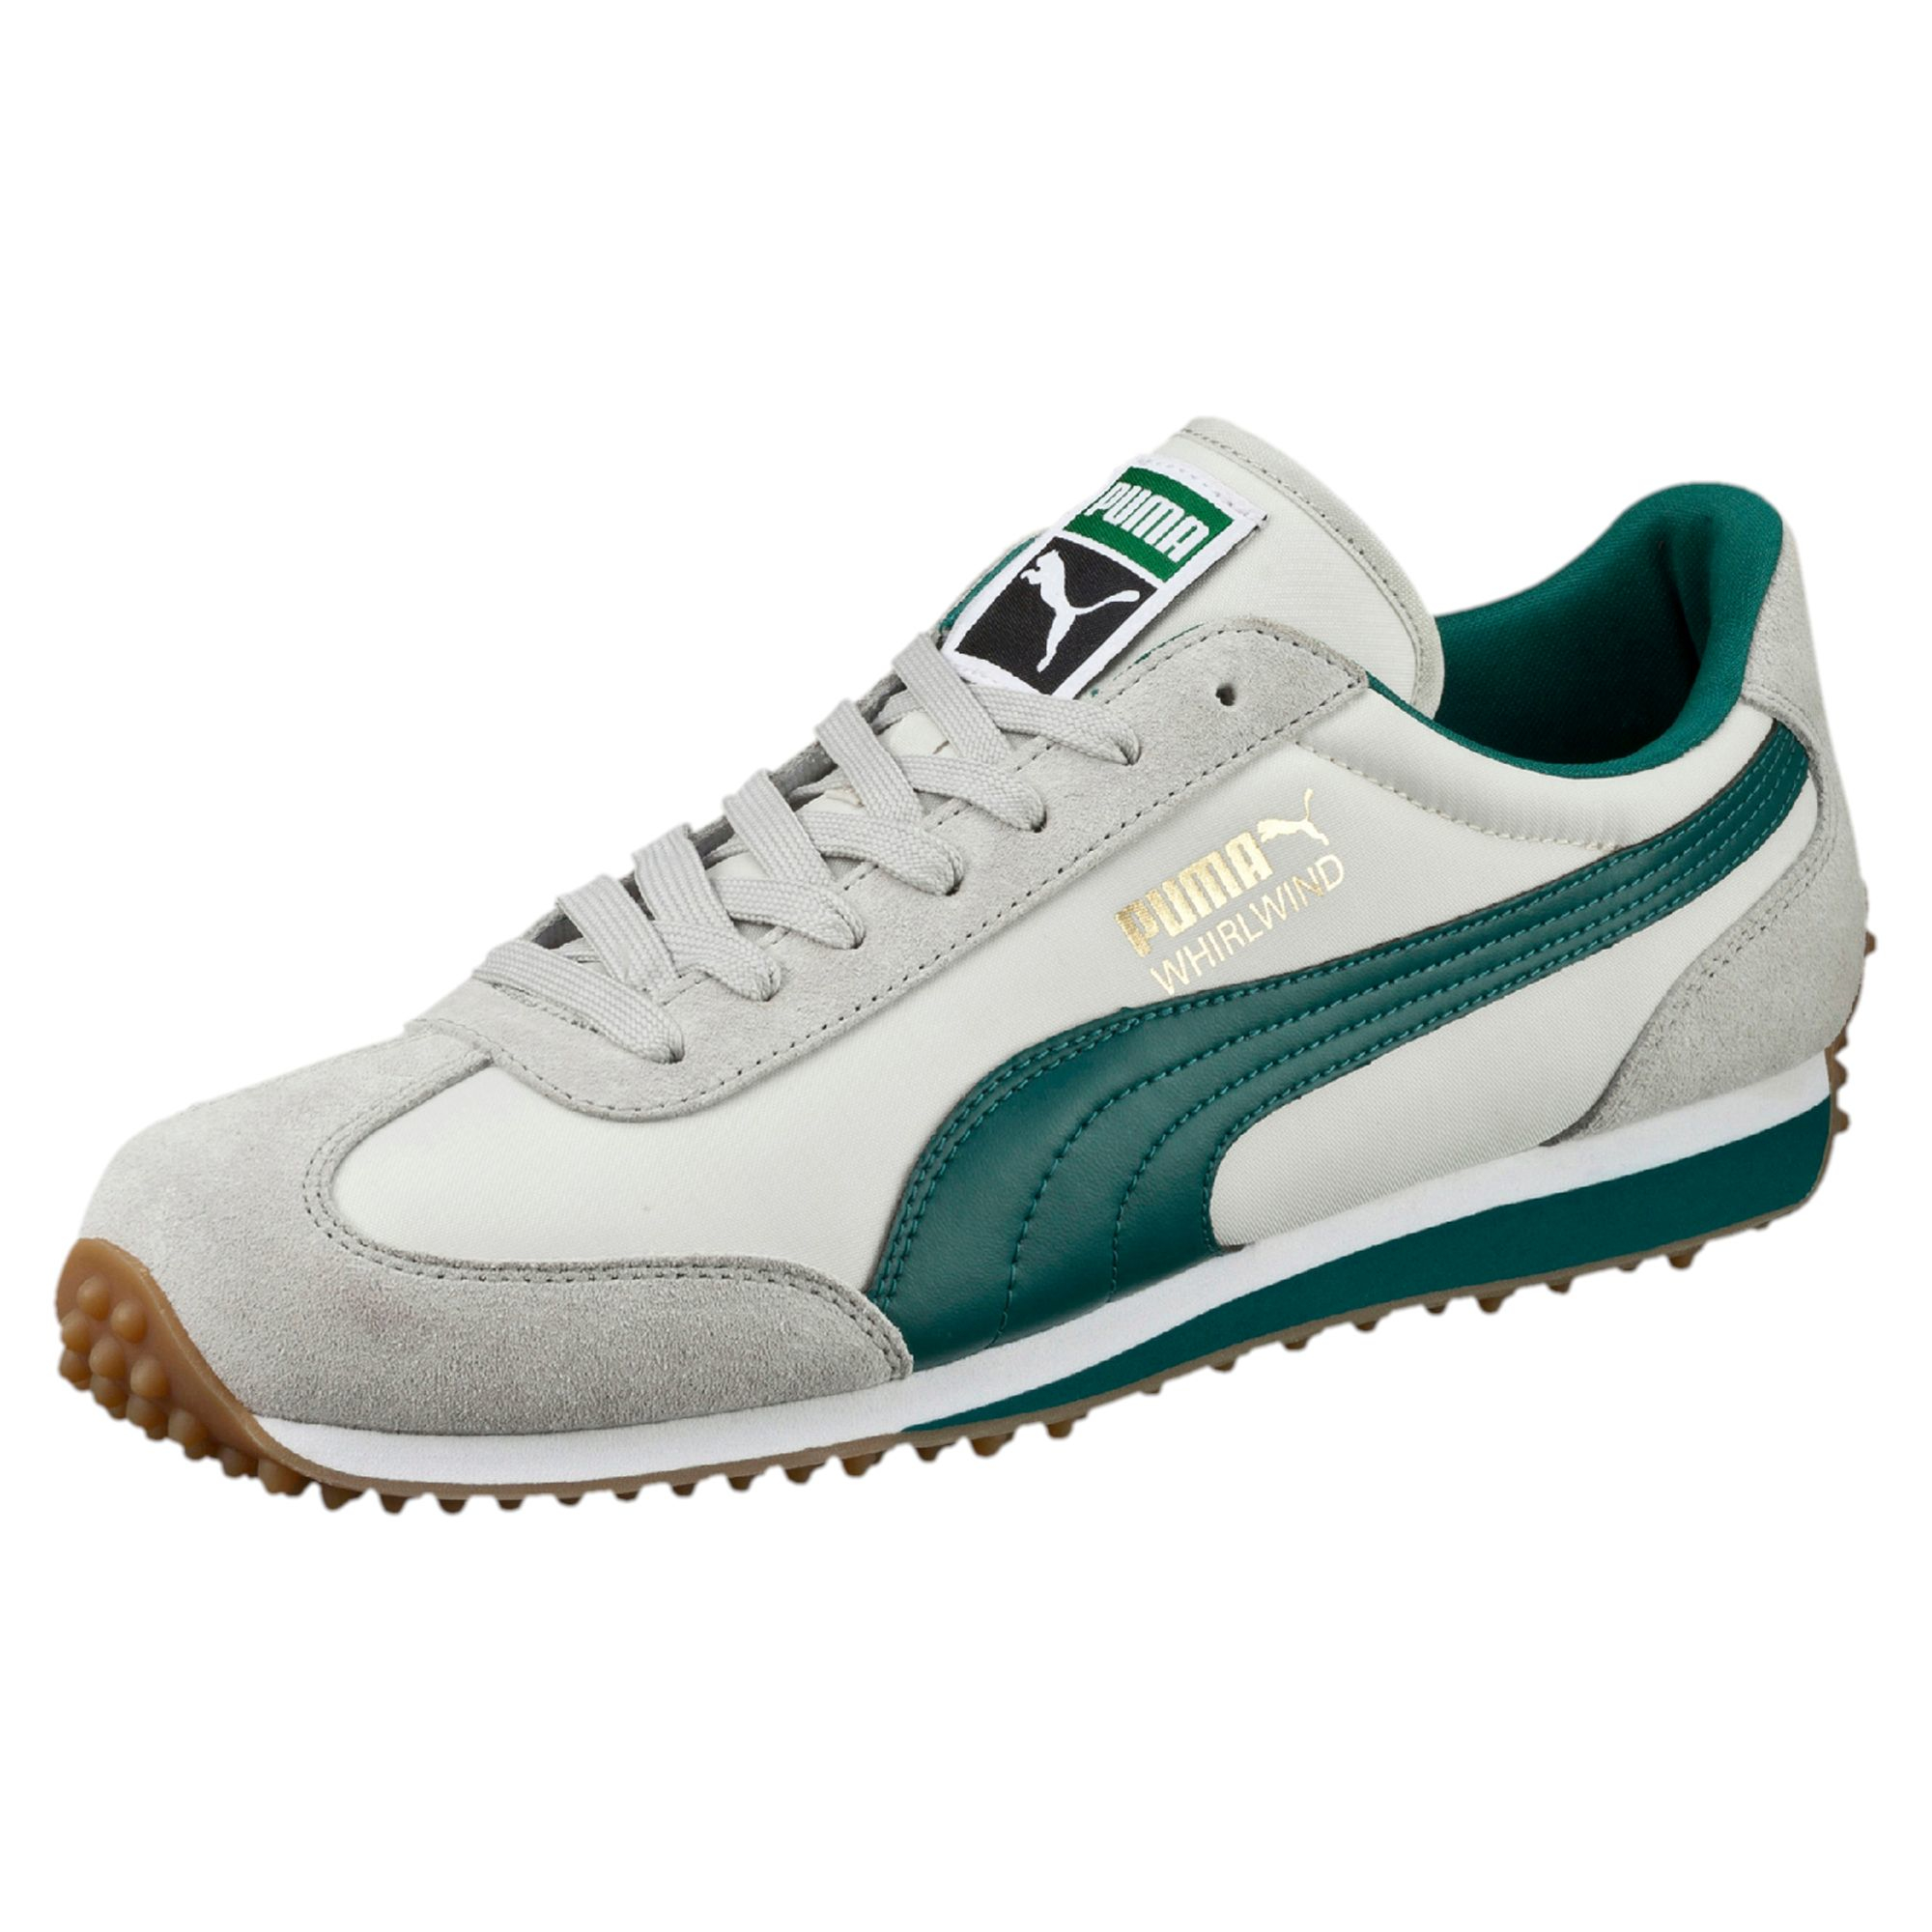 PUMA Synthetic Whirlwind Classic Men's 